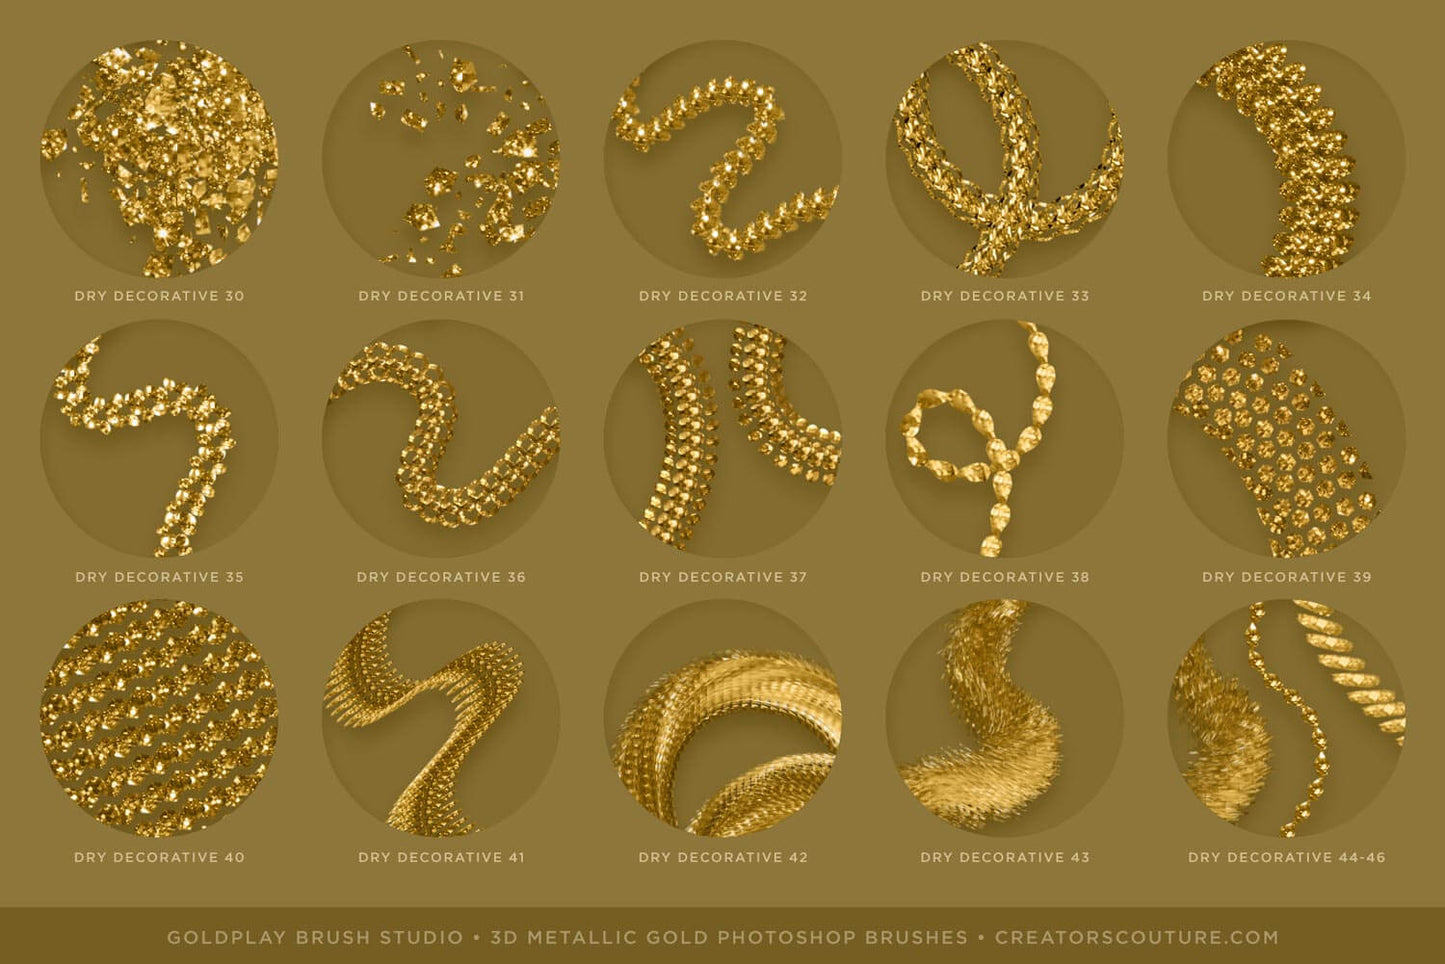 3d chain and textured metallic gold brush strokes chart 4 - Photoshop brush strokes that resemble 3d gold chains, liquid gold, & dimensional metallic gold